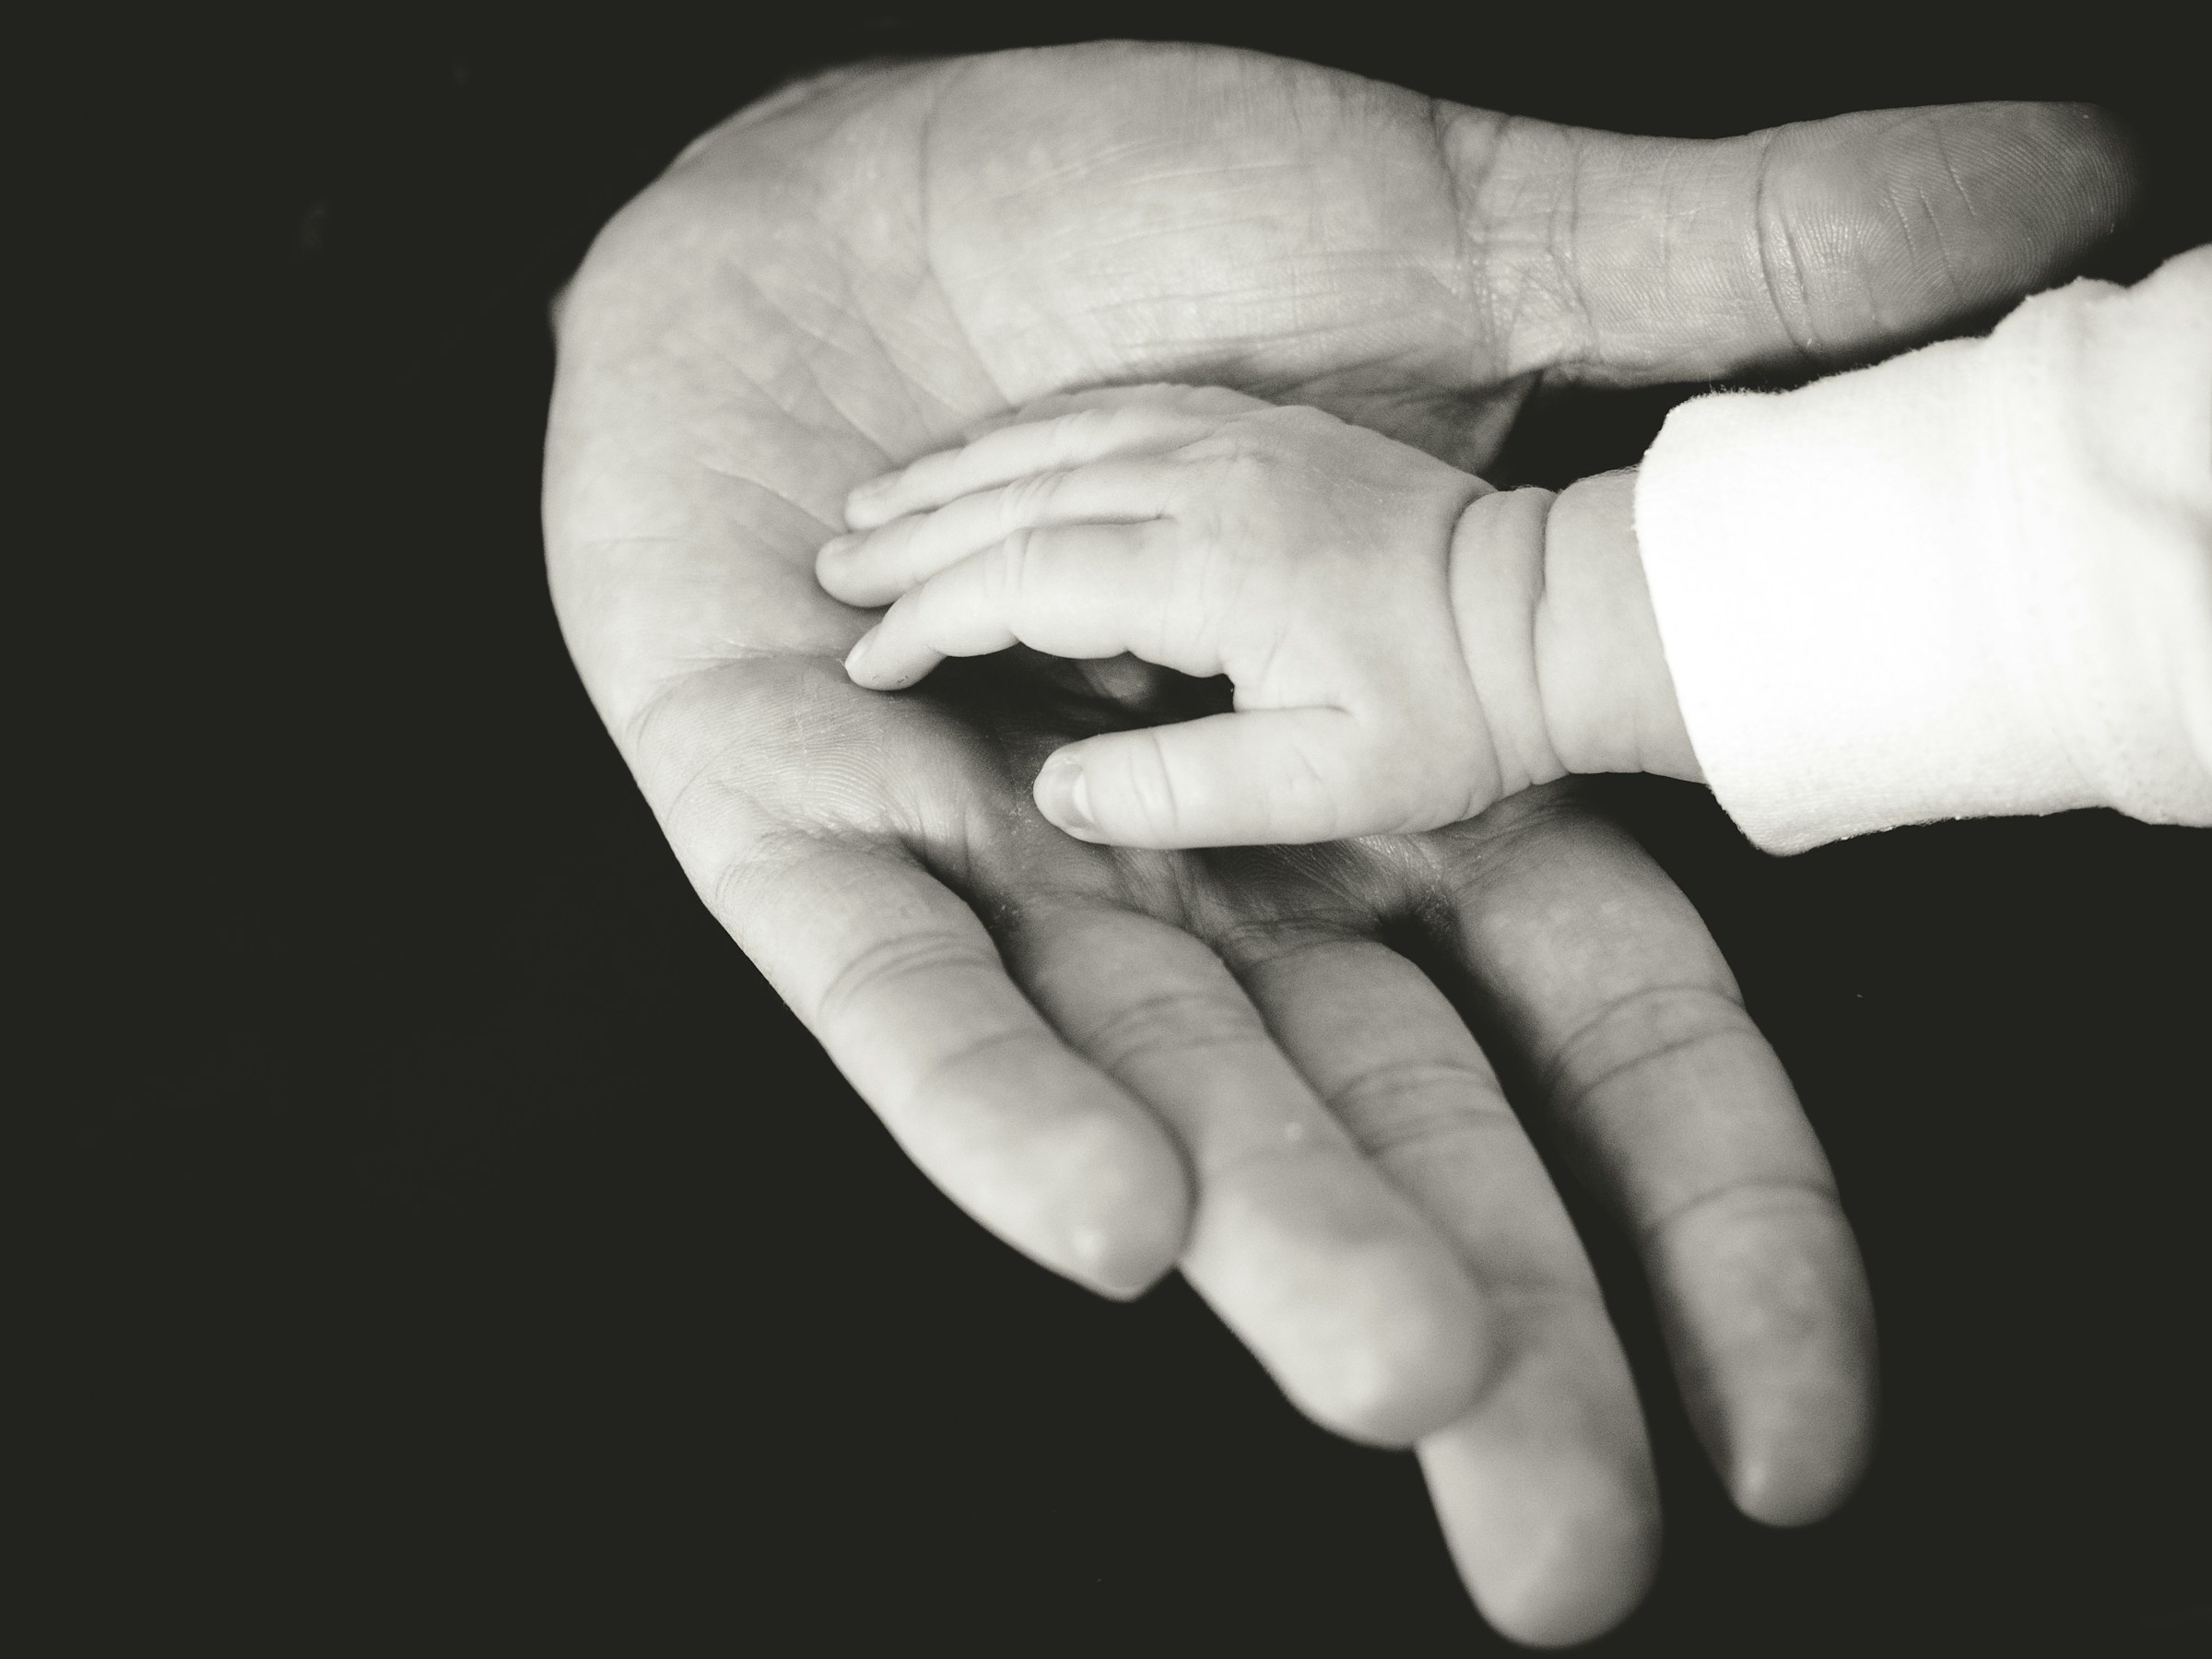 A grayscale photograph of a parent holding their baby's hand | Source: Unsplash